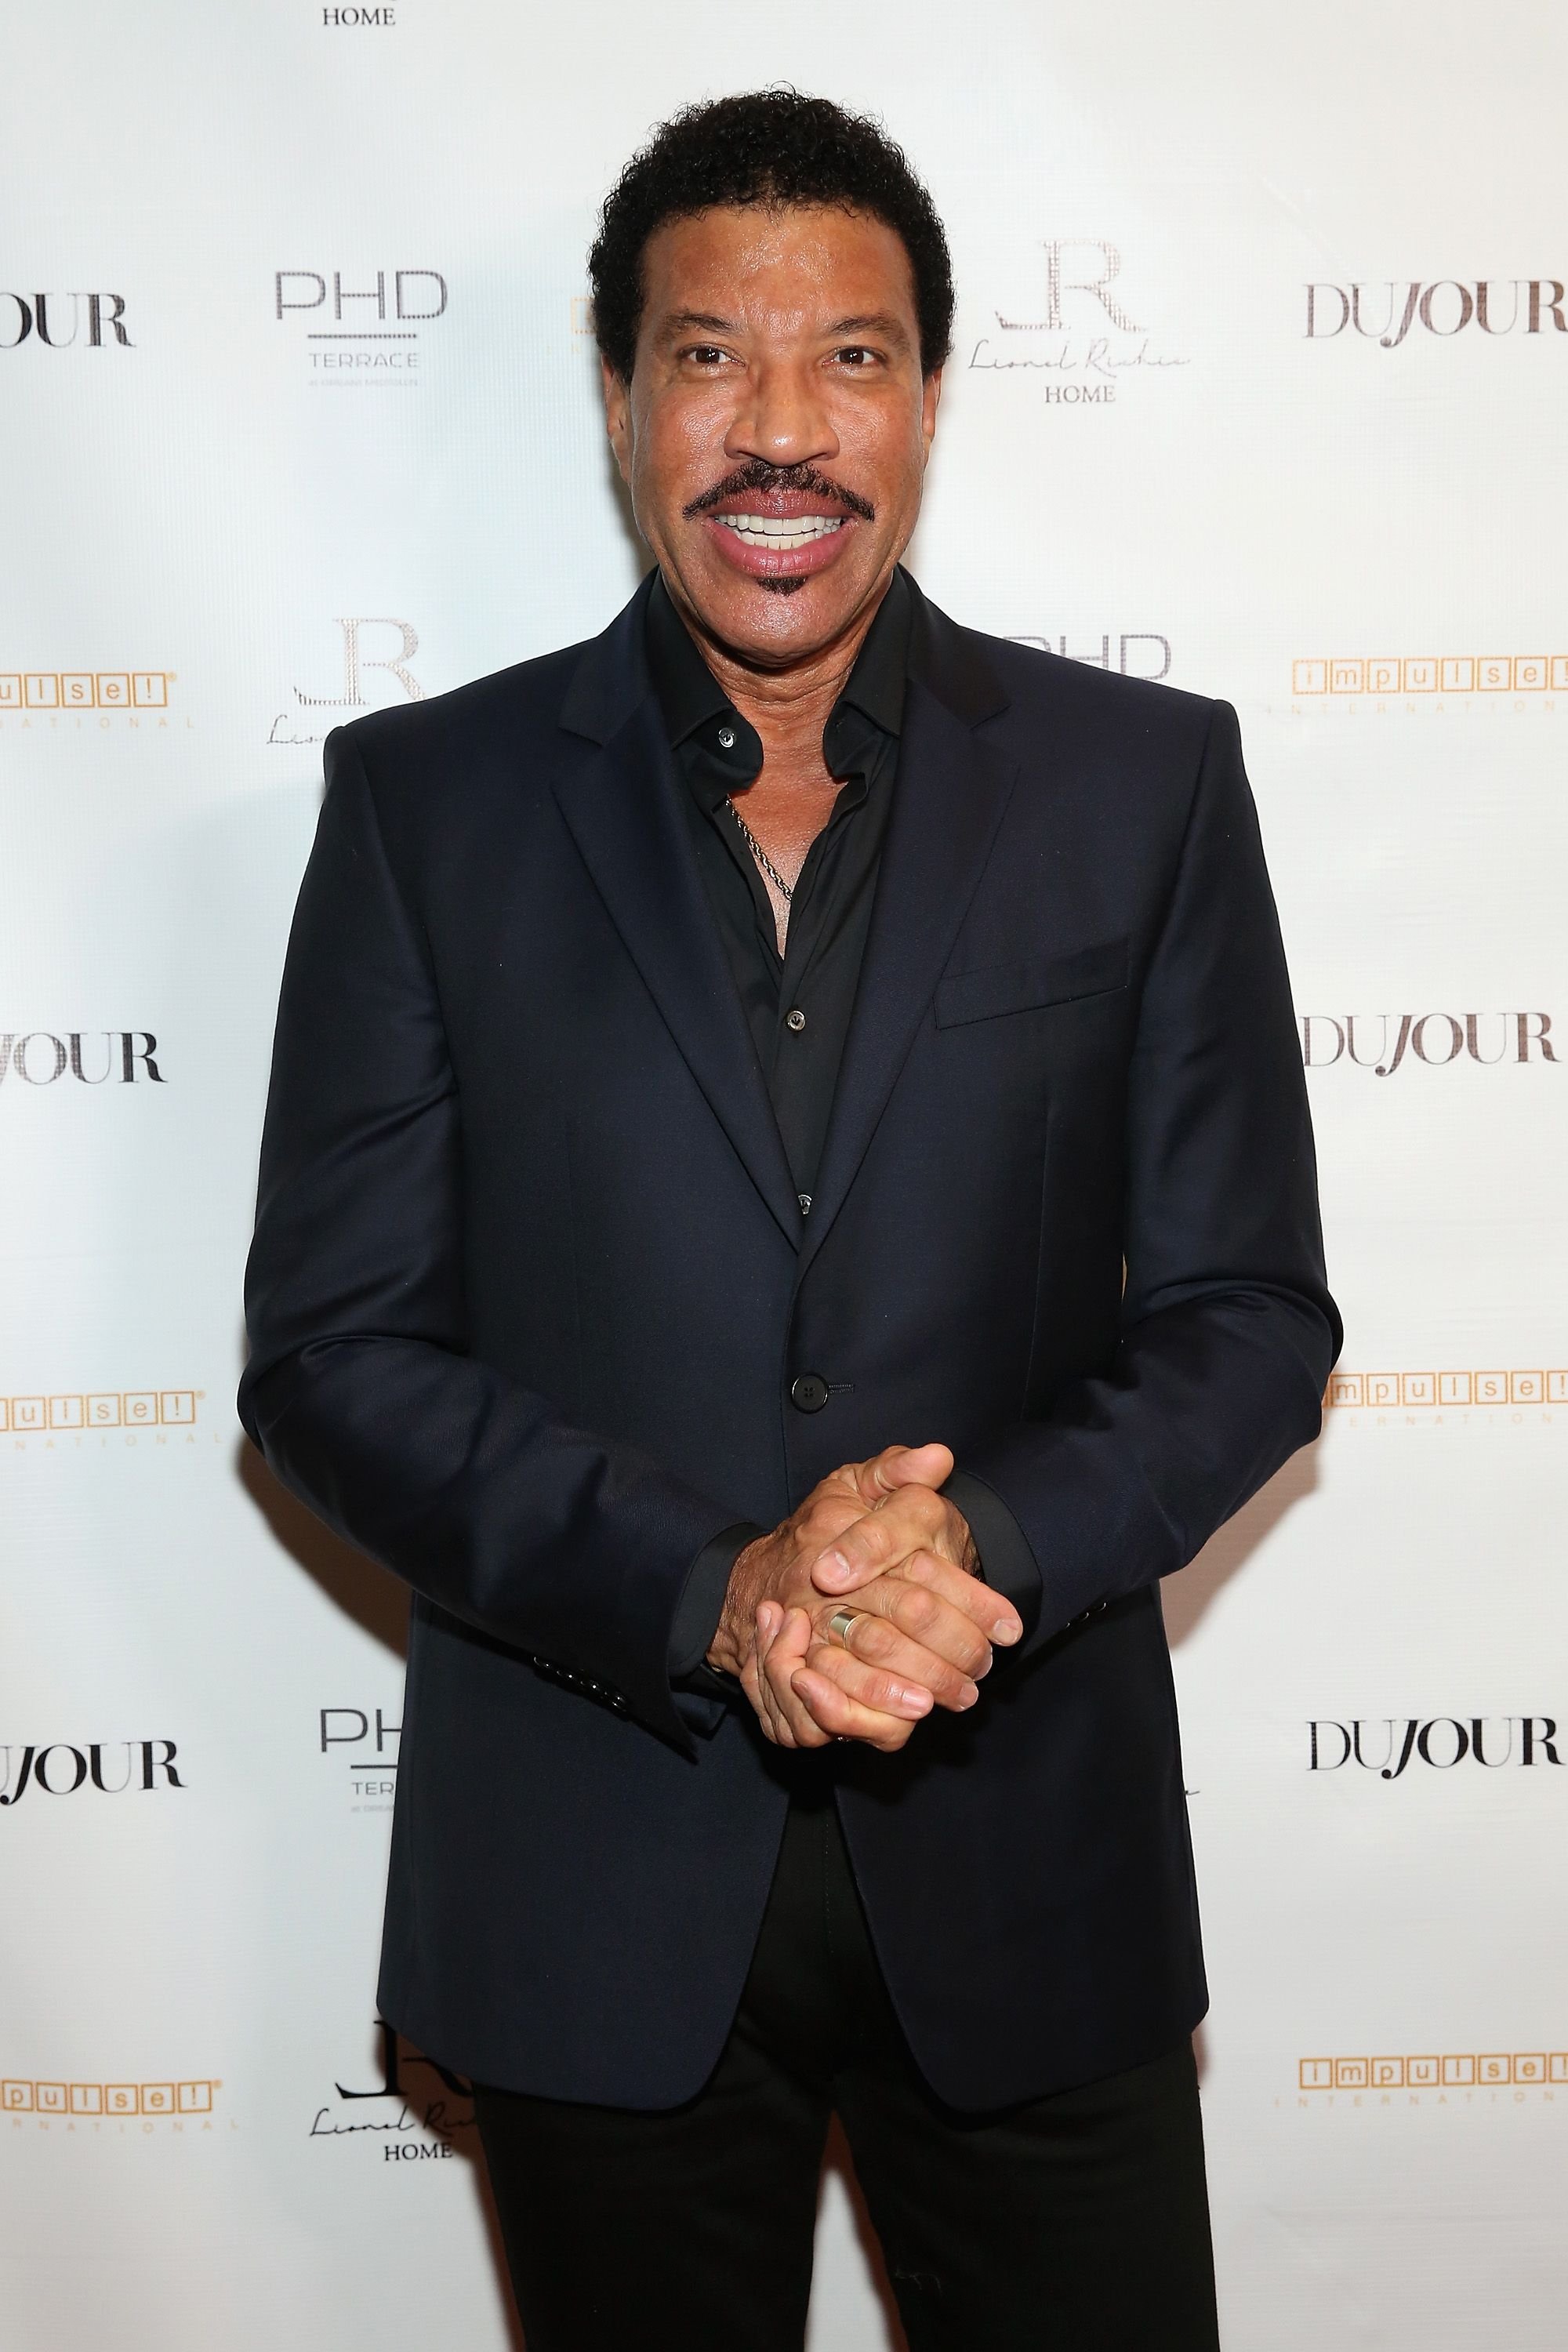 Lionel Richie at Jason Binn's DuJour Magazine and Lionel Richie Home Collection launch on October 27, 2015. | Photo: Getty Images